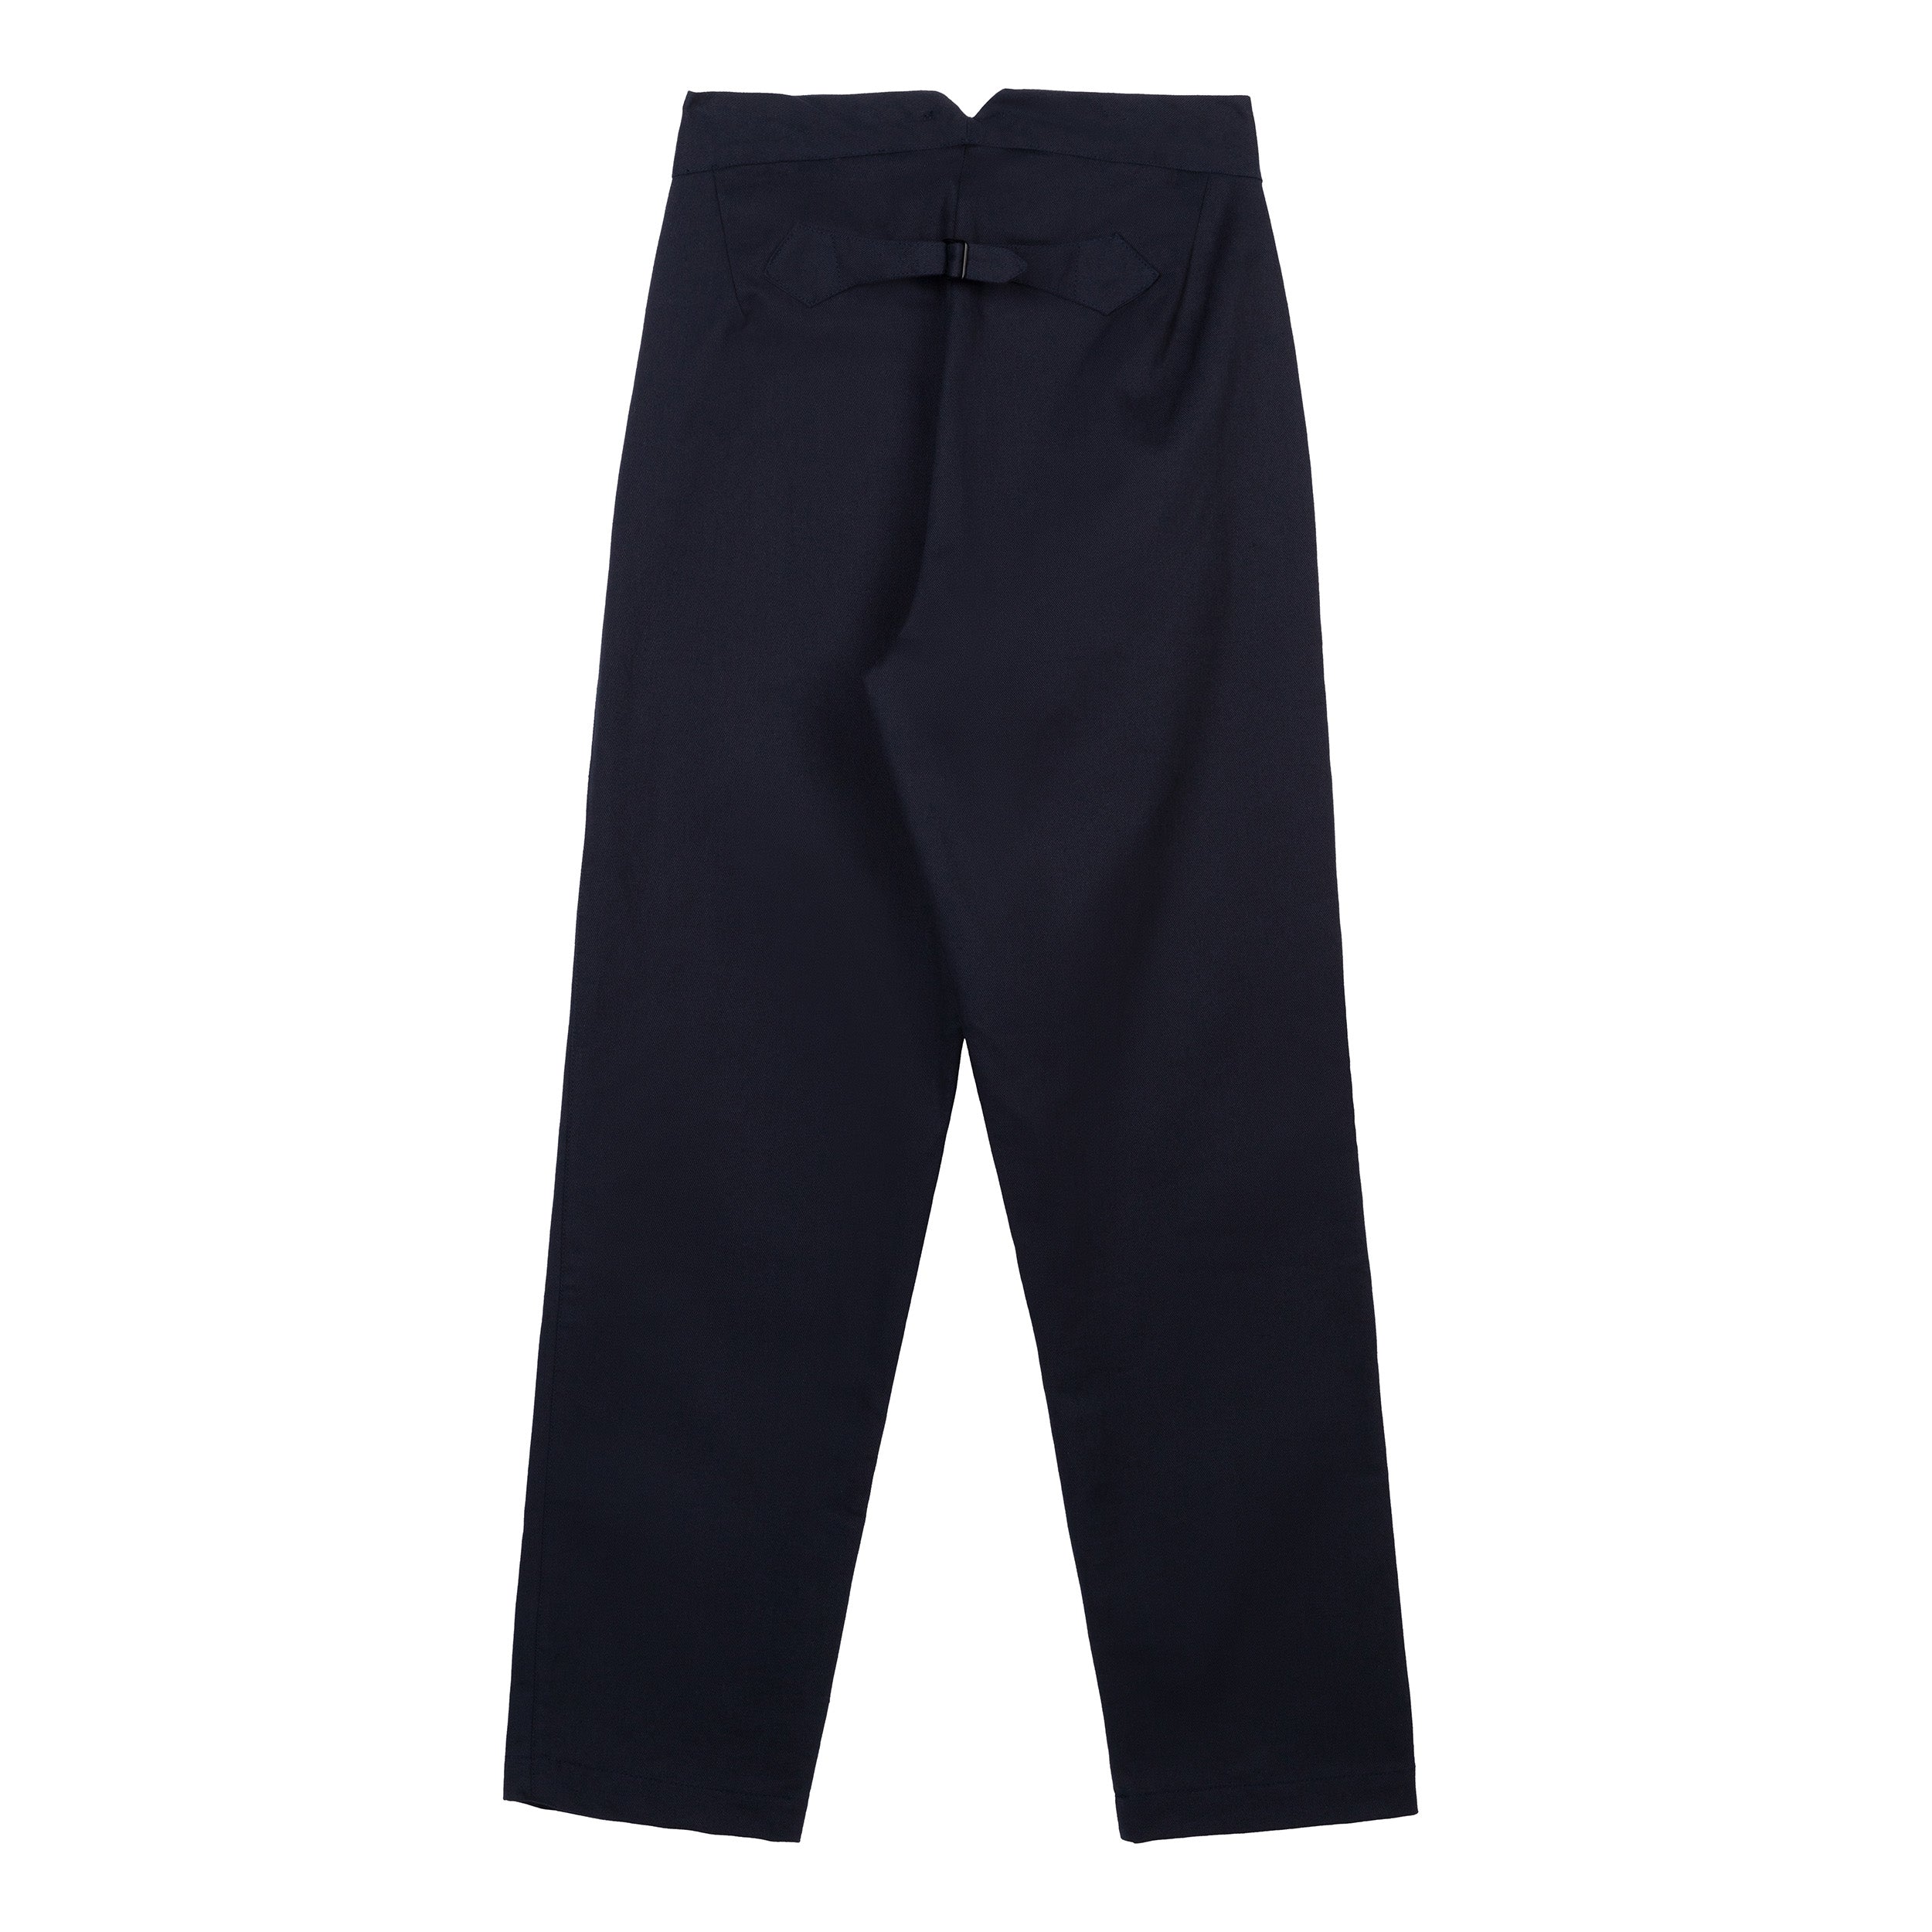 Carrier Company Colonial Trouser in Navy Cotton Drill